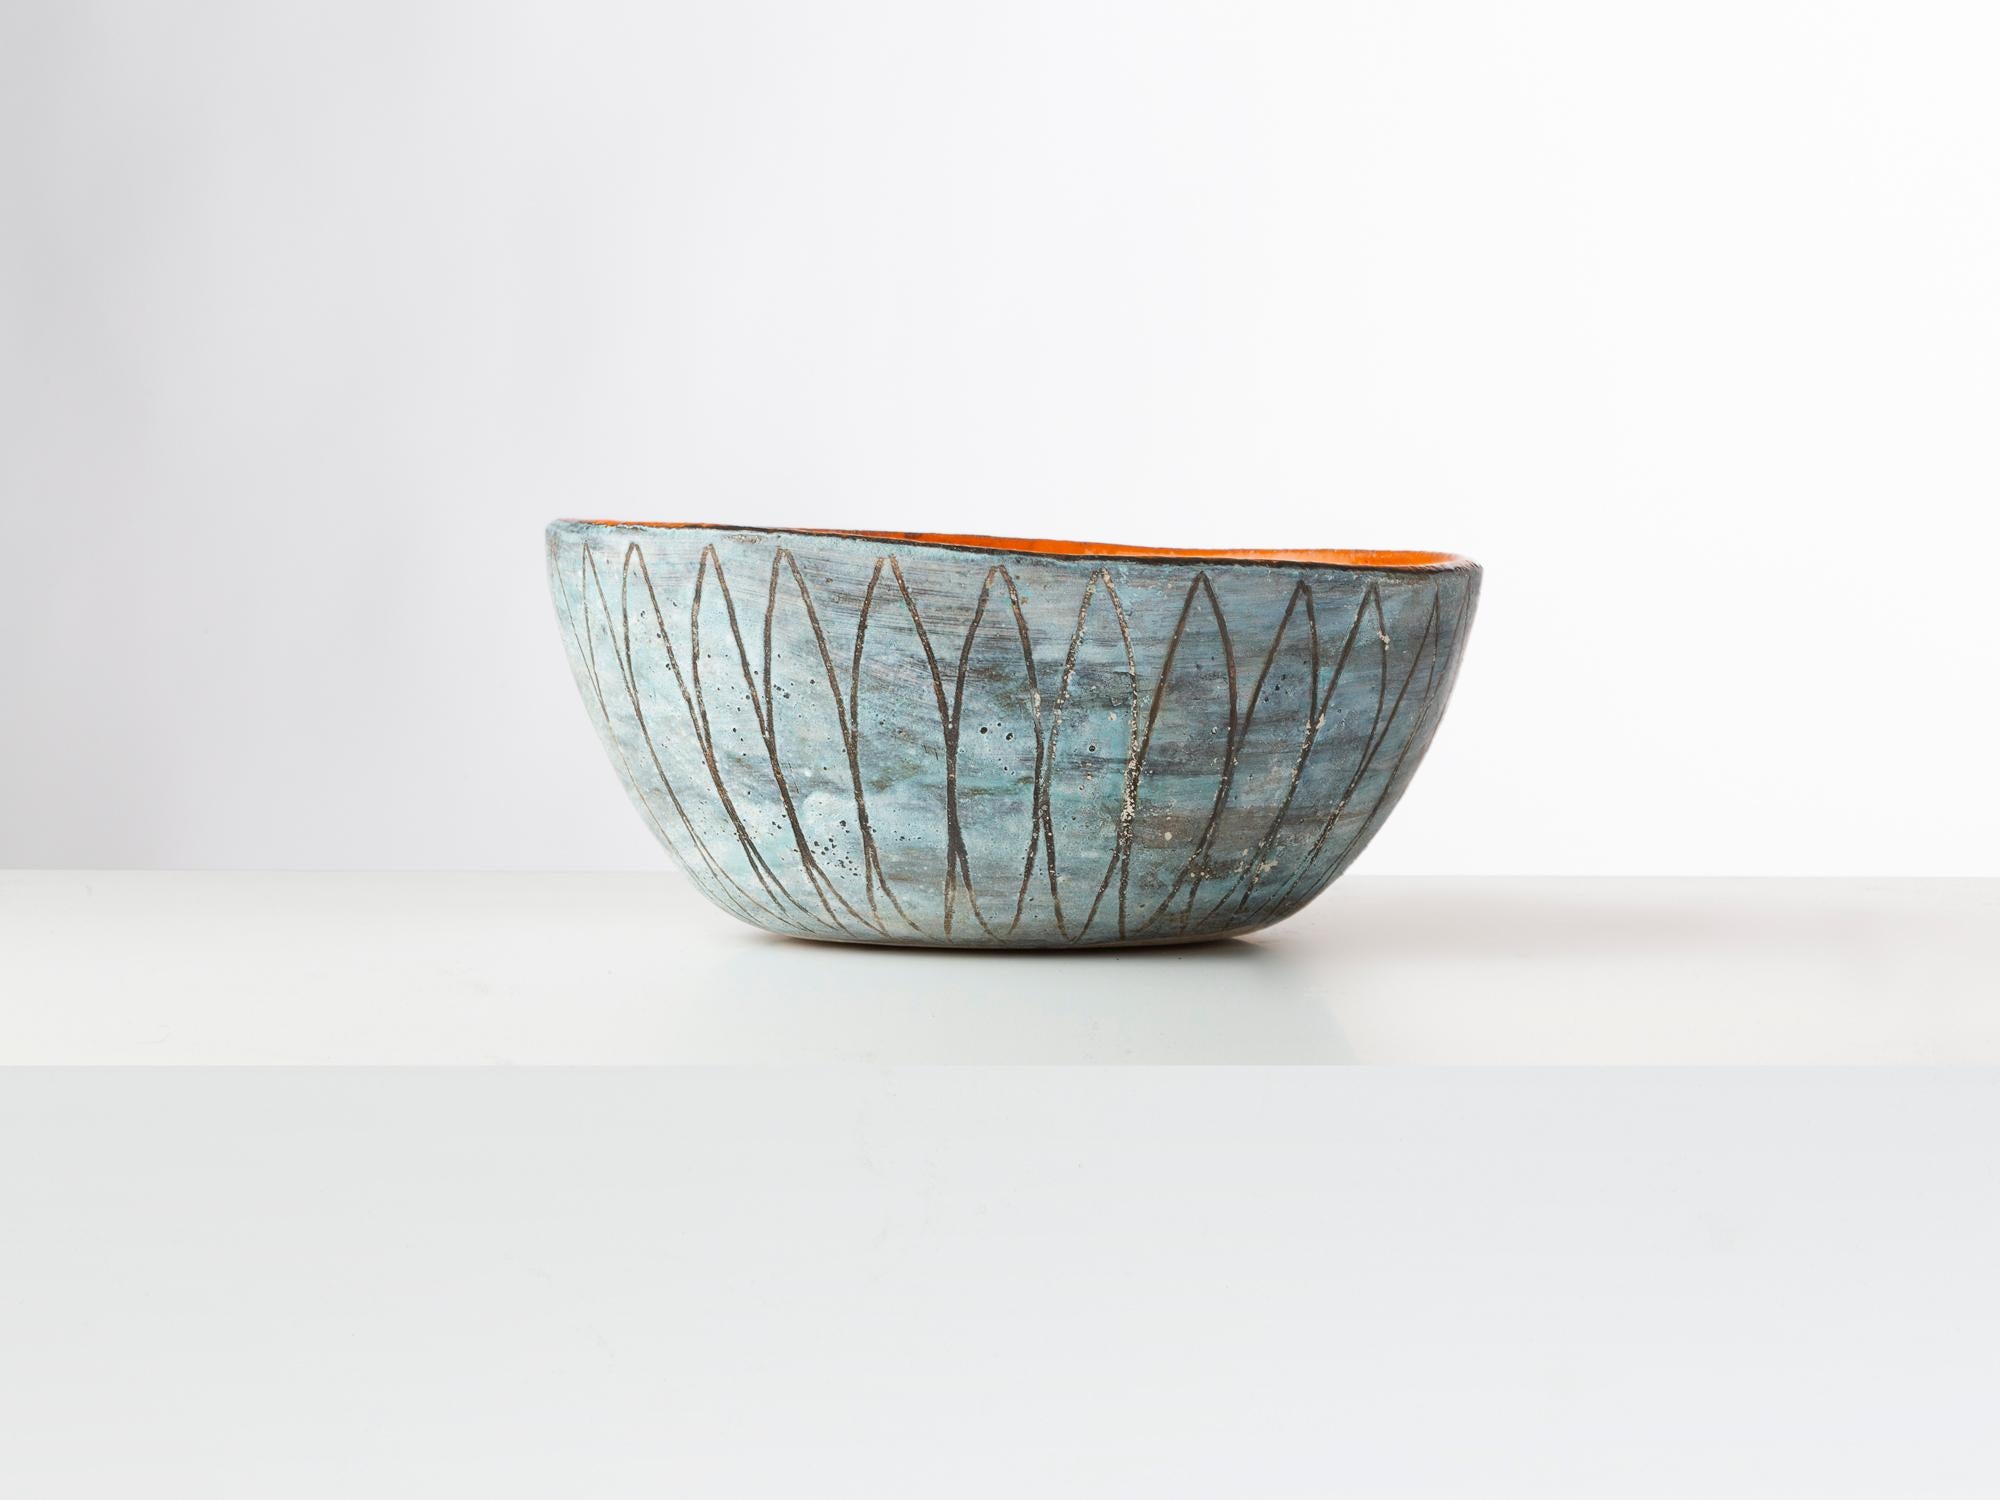 Beauiful André Aleth Masson ceramic bowl, glazed orange inside and grey/blue outside.
Signed under the base 'MASSON'.
Unique piece.

André Aleth Masson was a renowned French ceramicist whose work left an indelible mark on the world of pottery. Born